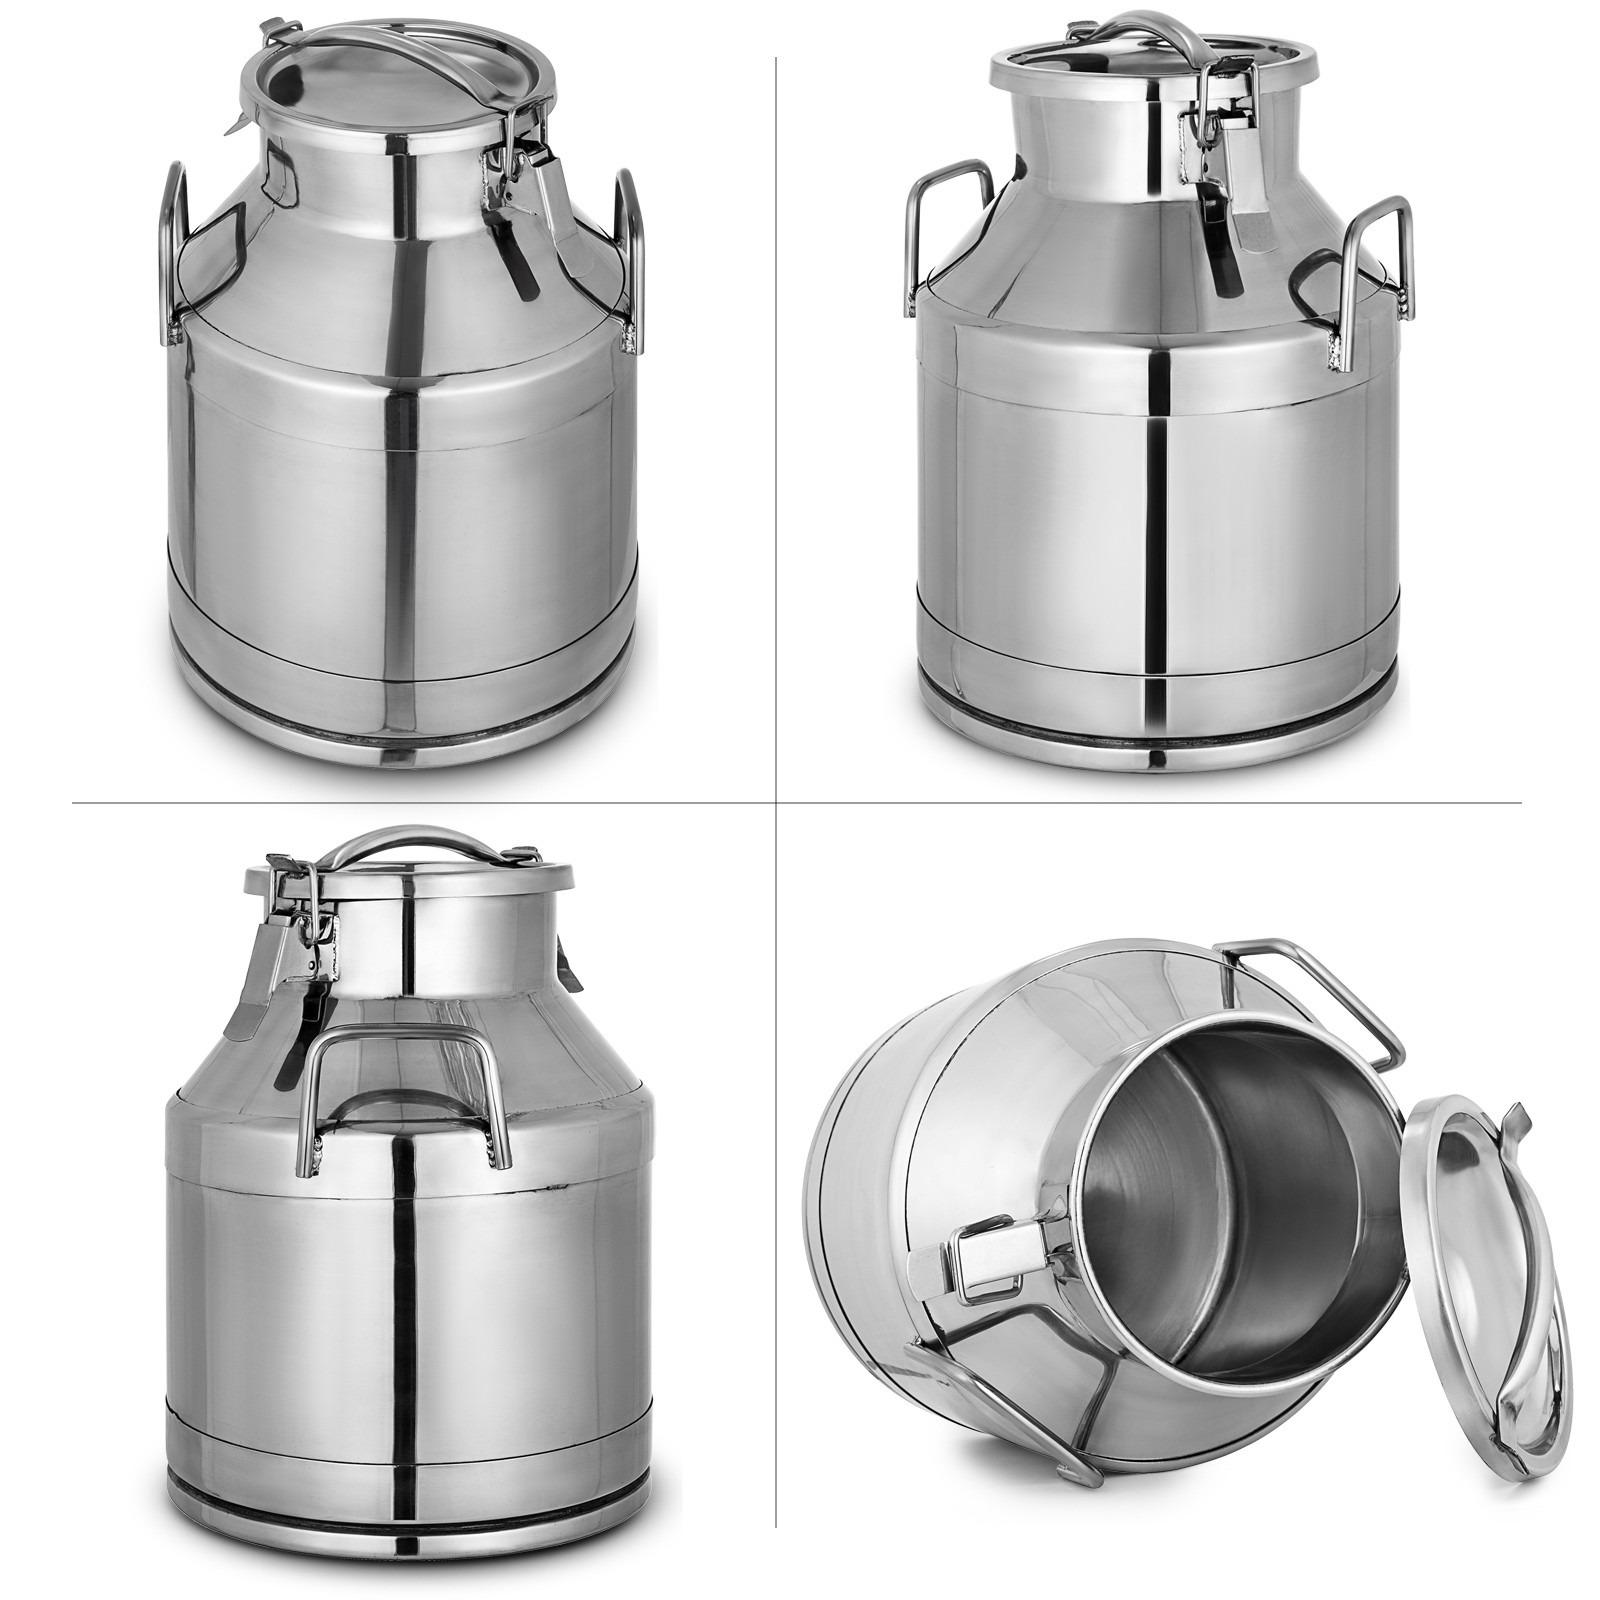 20 LITER STAINLESS Steel Can Milk Canister /Milk POT Bucket Gallon 20 Gallon Stainless Steel Milk Can